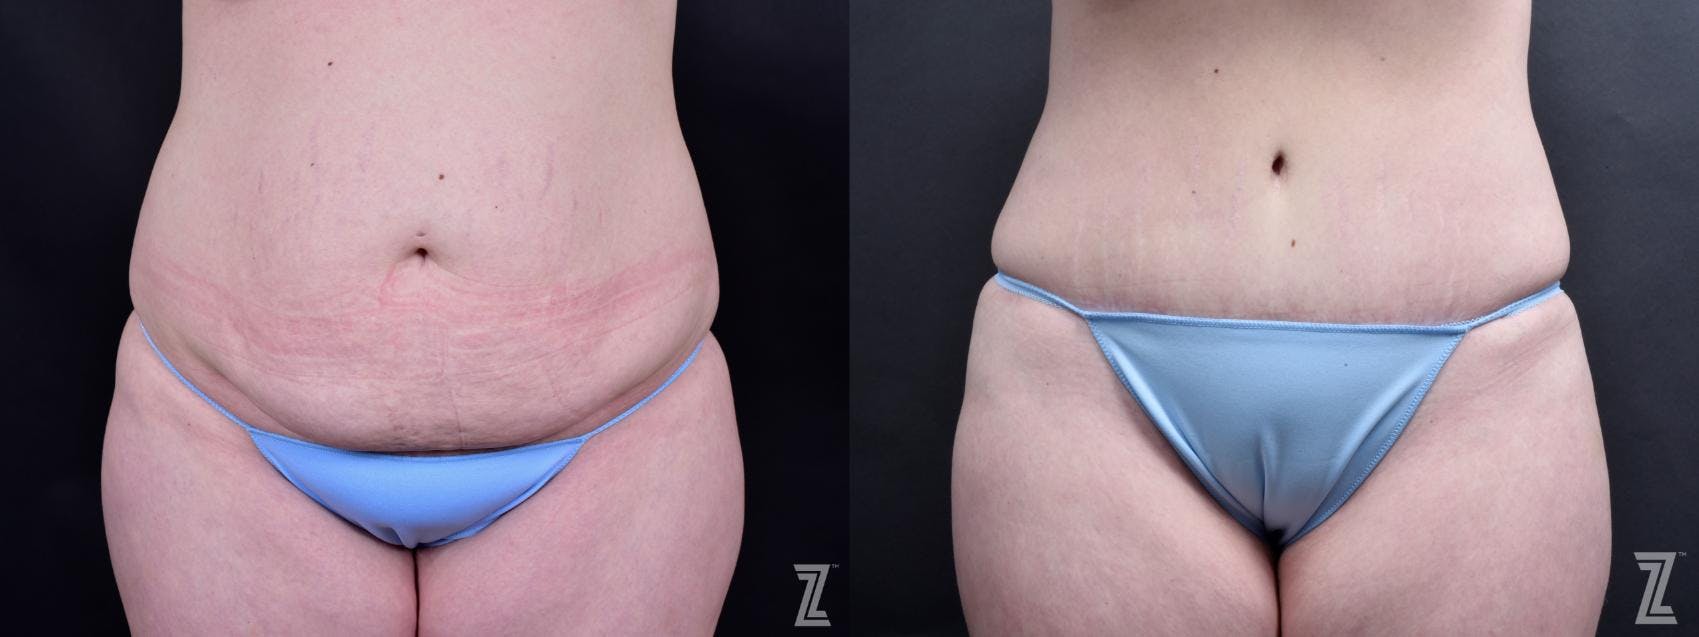 Mons Pubis Reduction Before & After Gallery: Patient 2